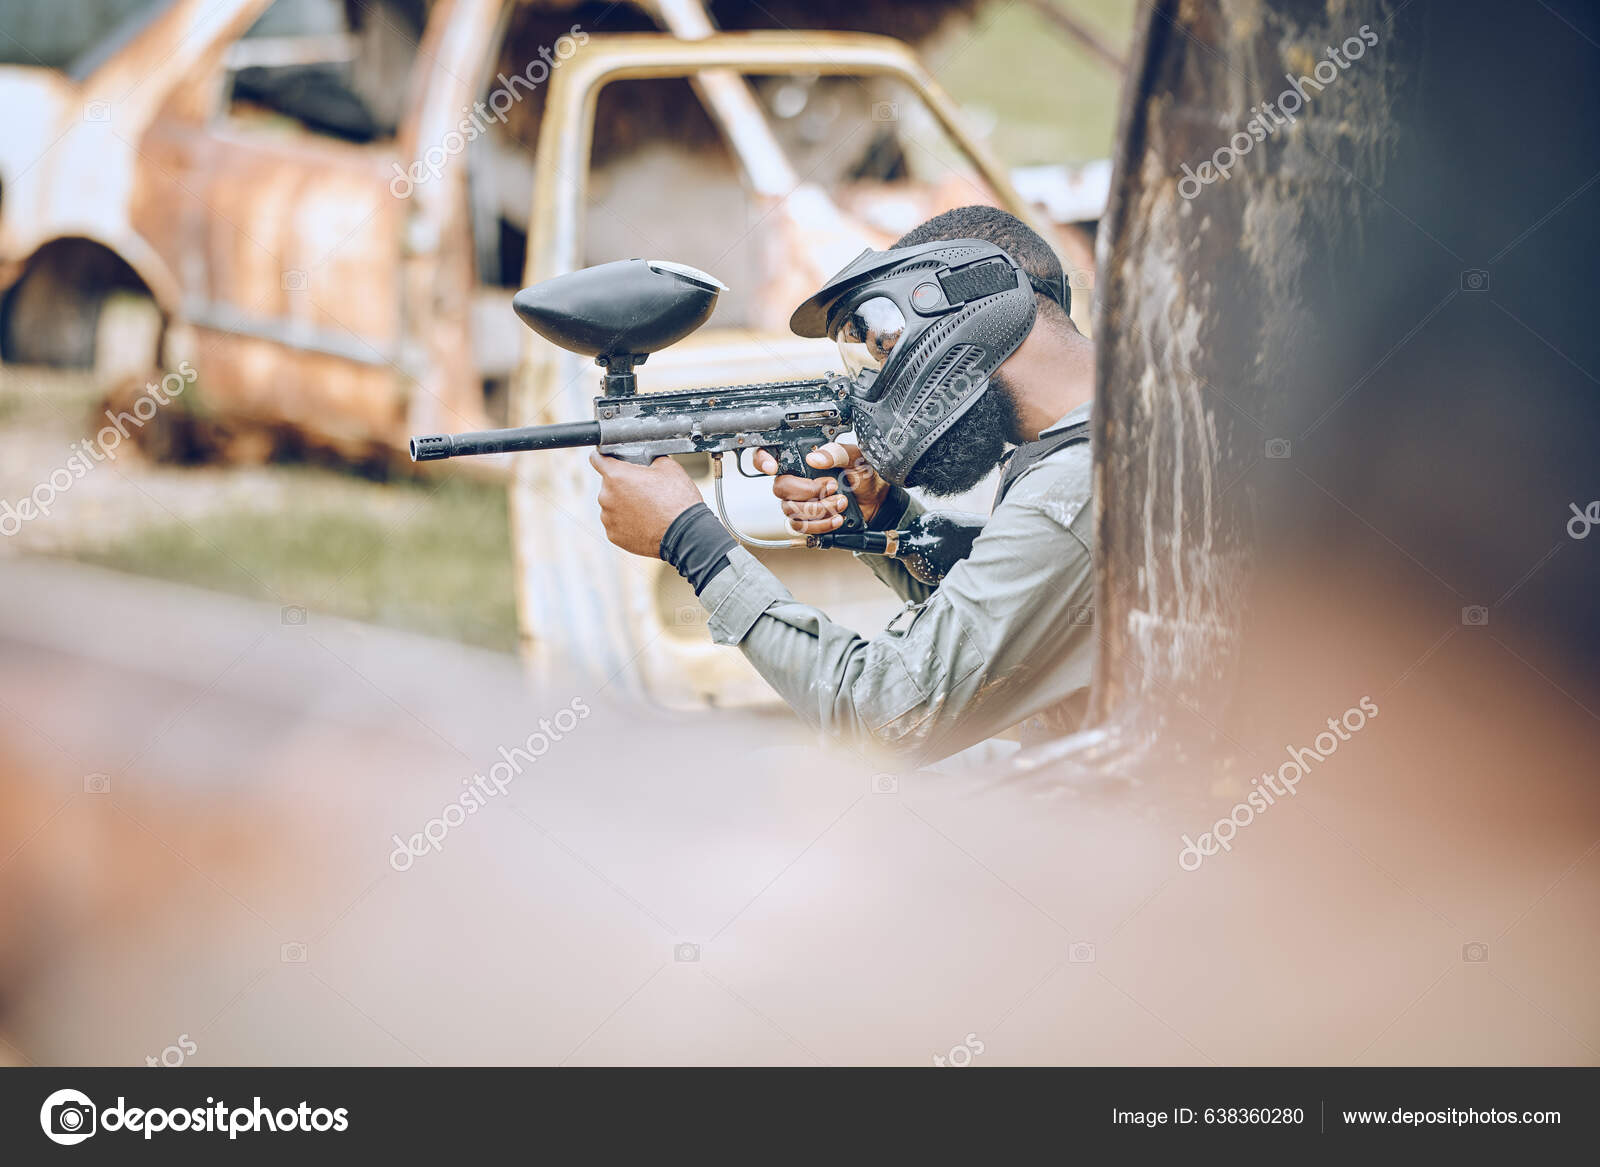 Action Paintball Target Man Field Sports Fitness Shooting Games War Stock Photo by ©PeopleImages 638360280